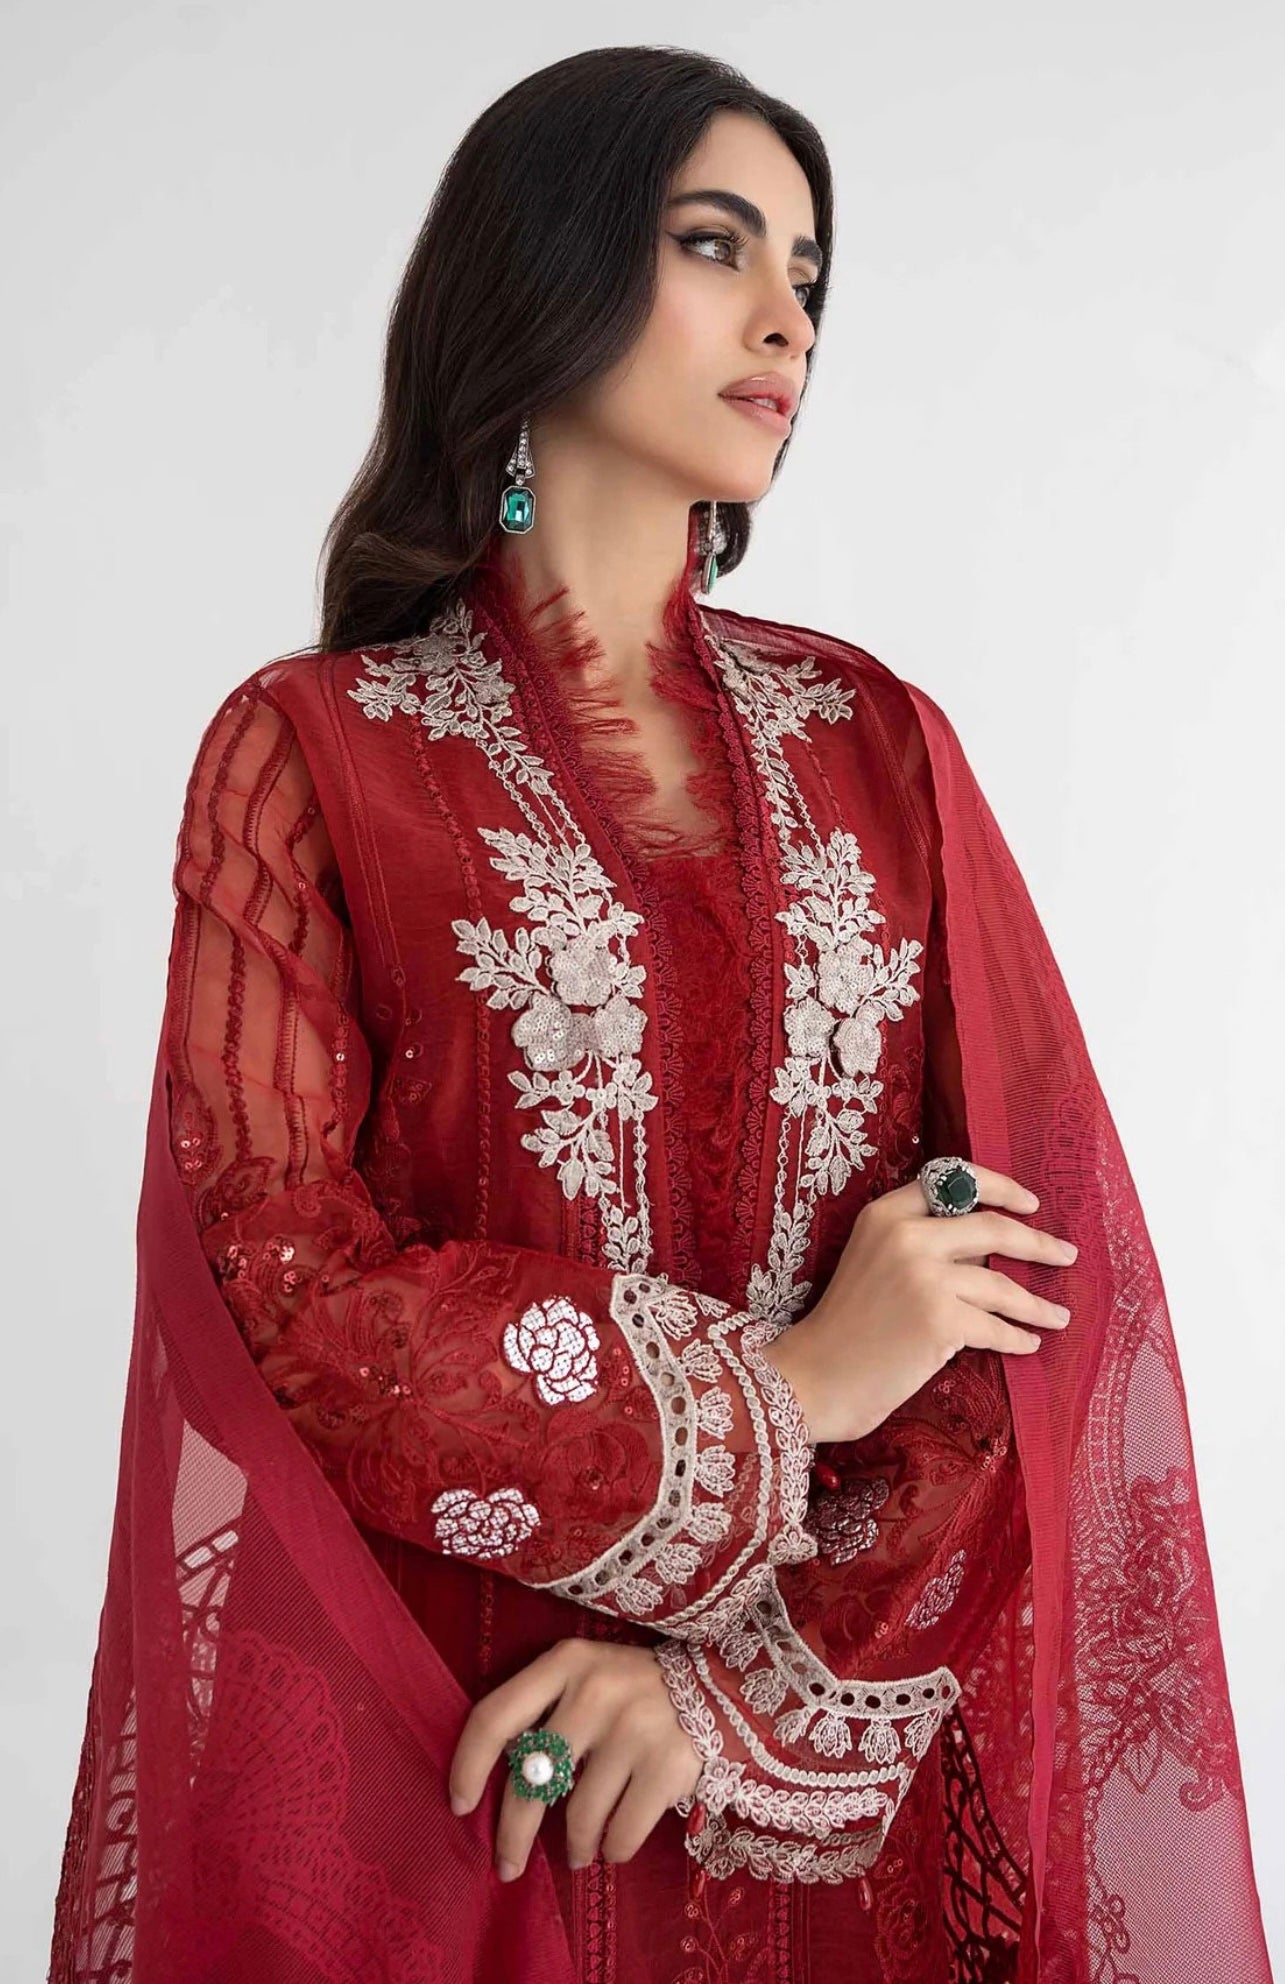 SIMRANS Maria b inspired dalhia 3 piece embroidered suit Maroon